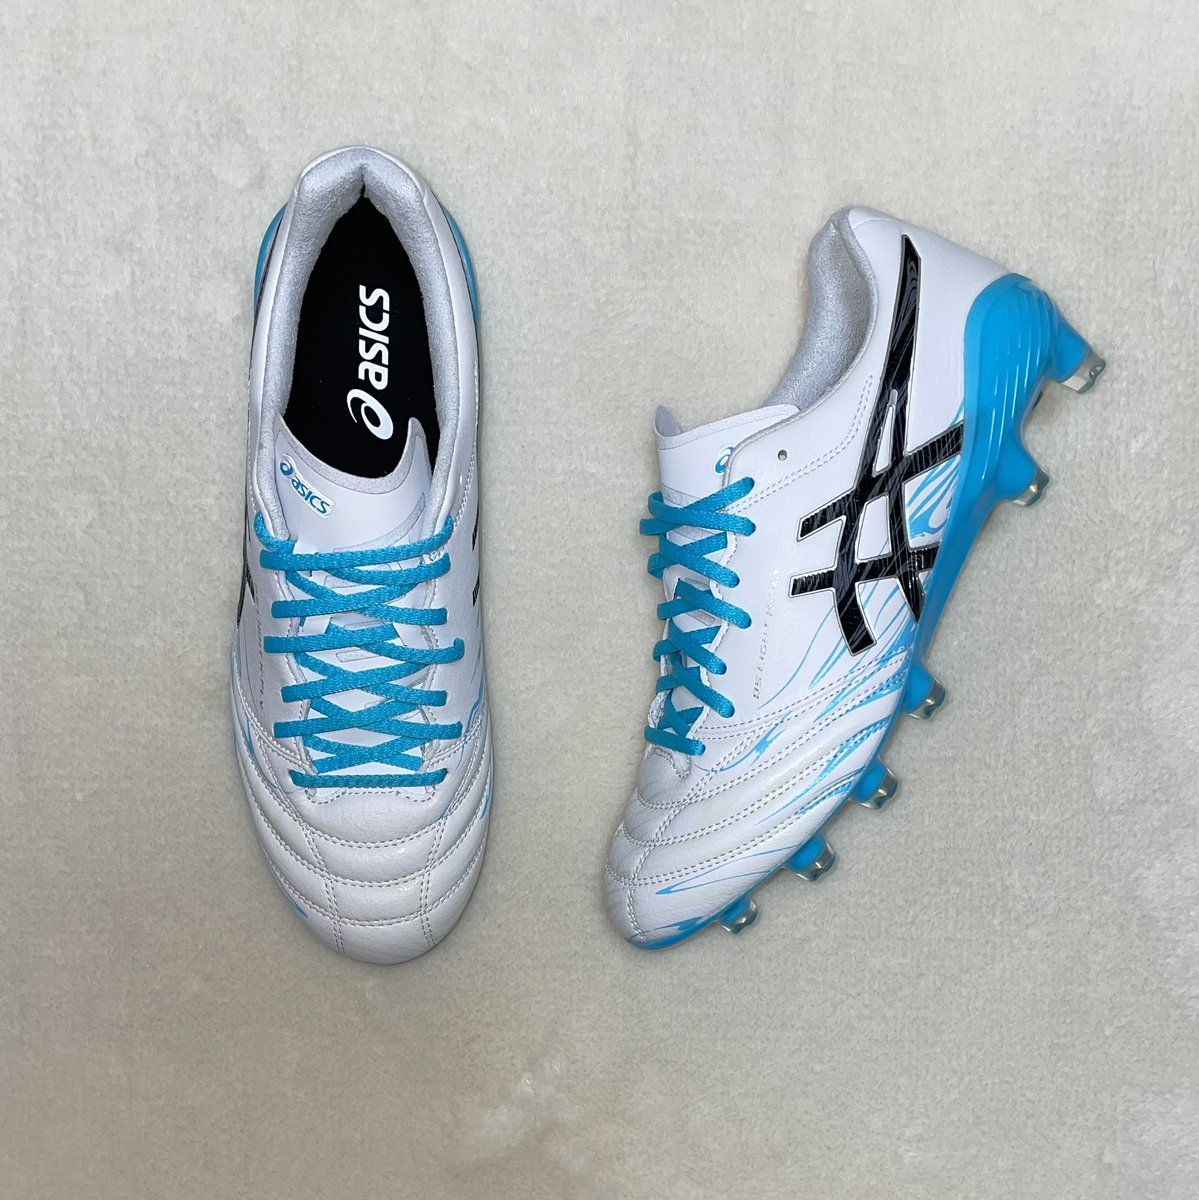 【asics DS LIGHT X-FLY 5 LIMITED】